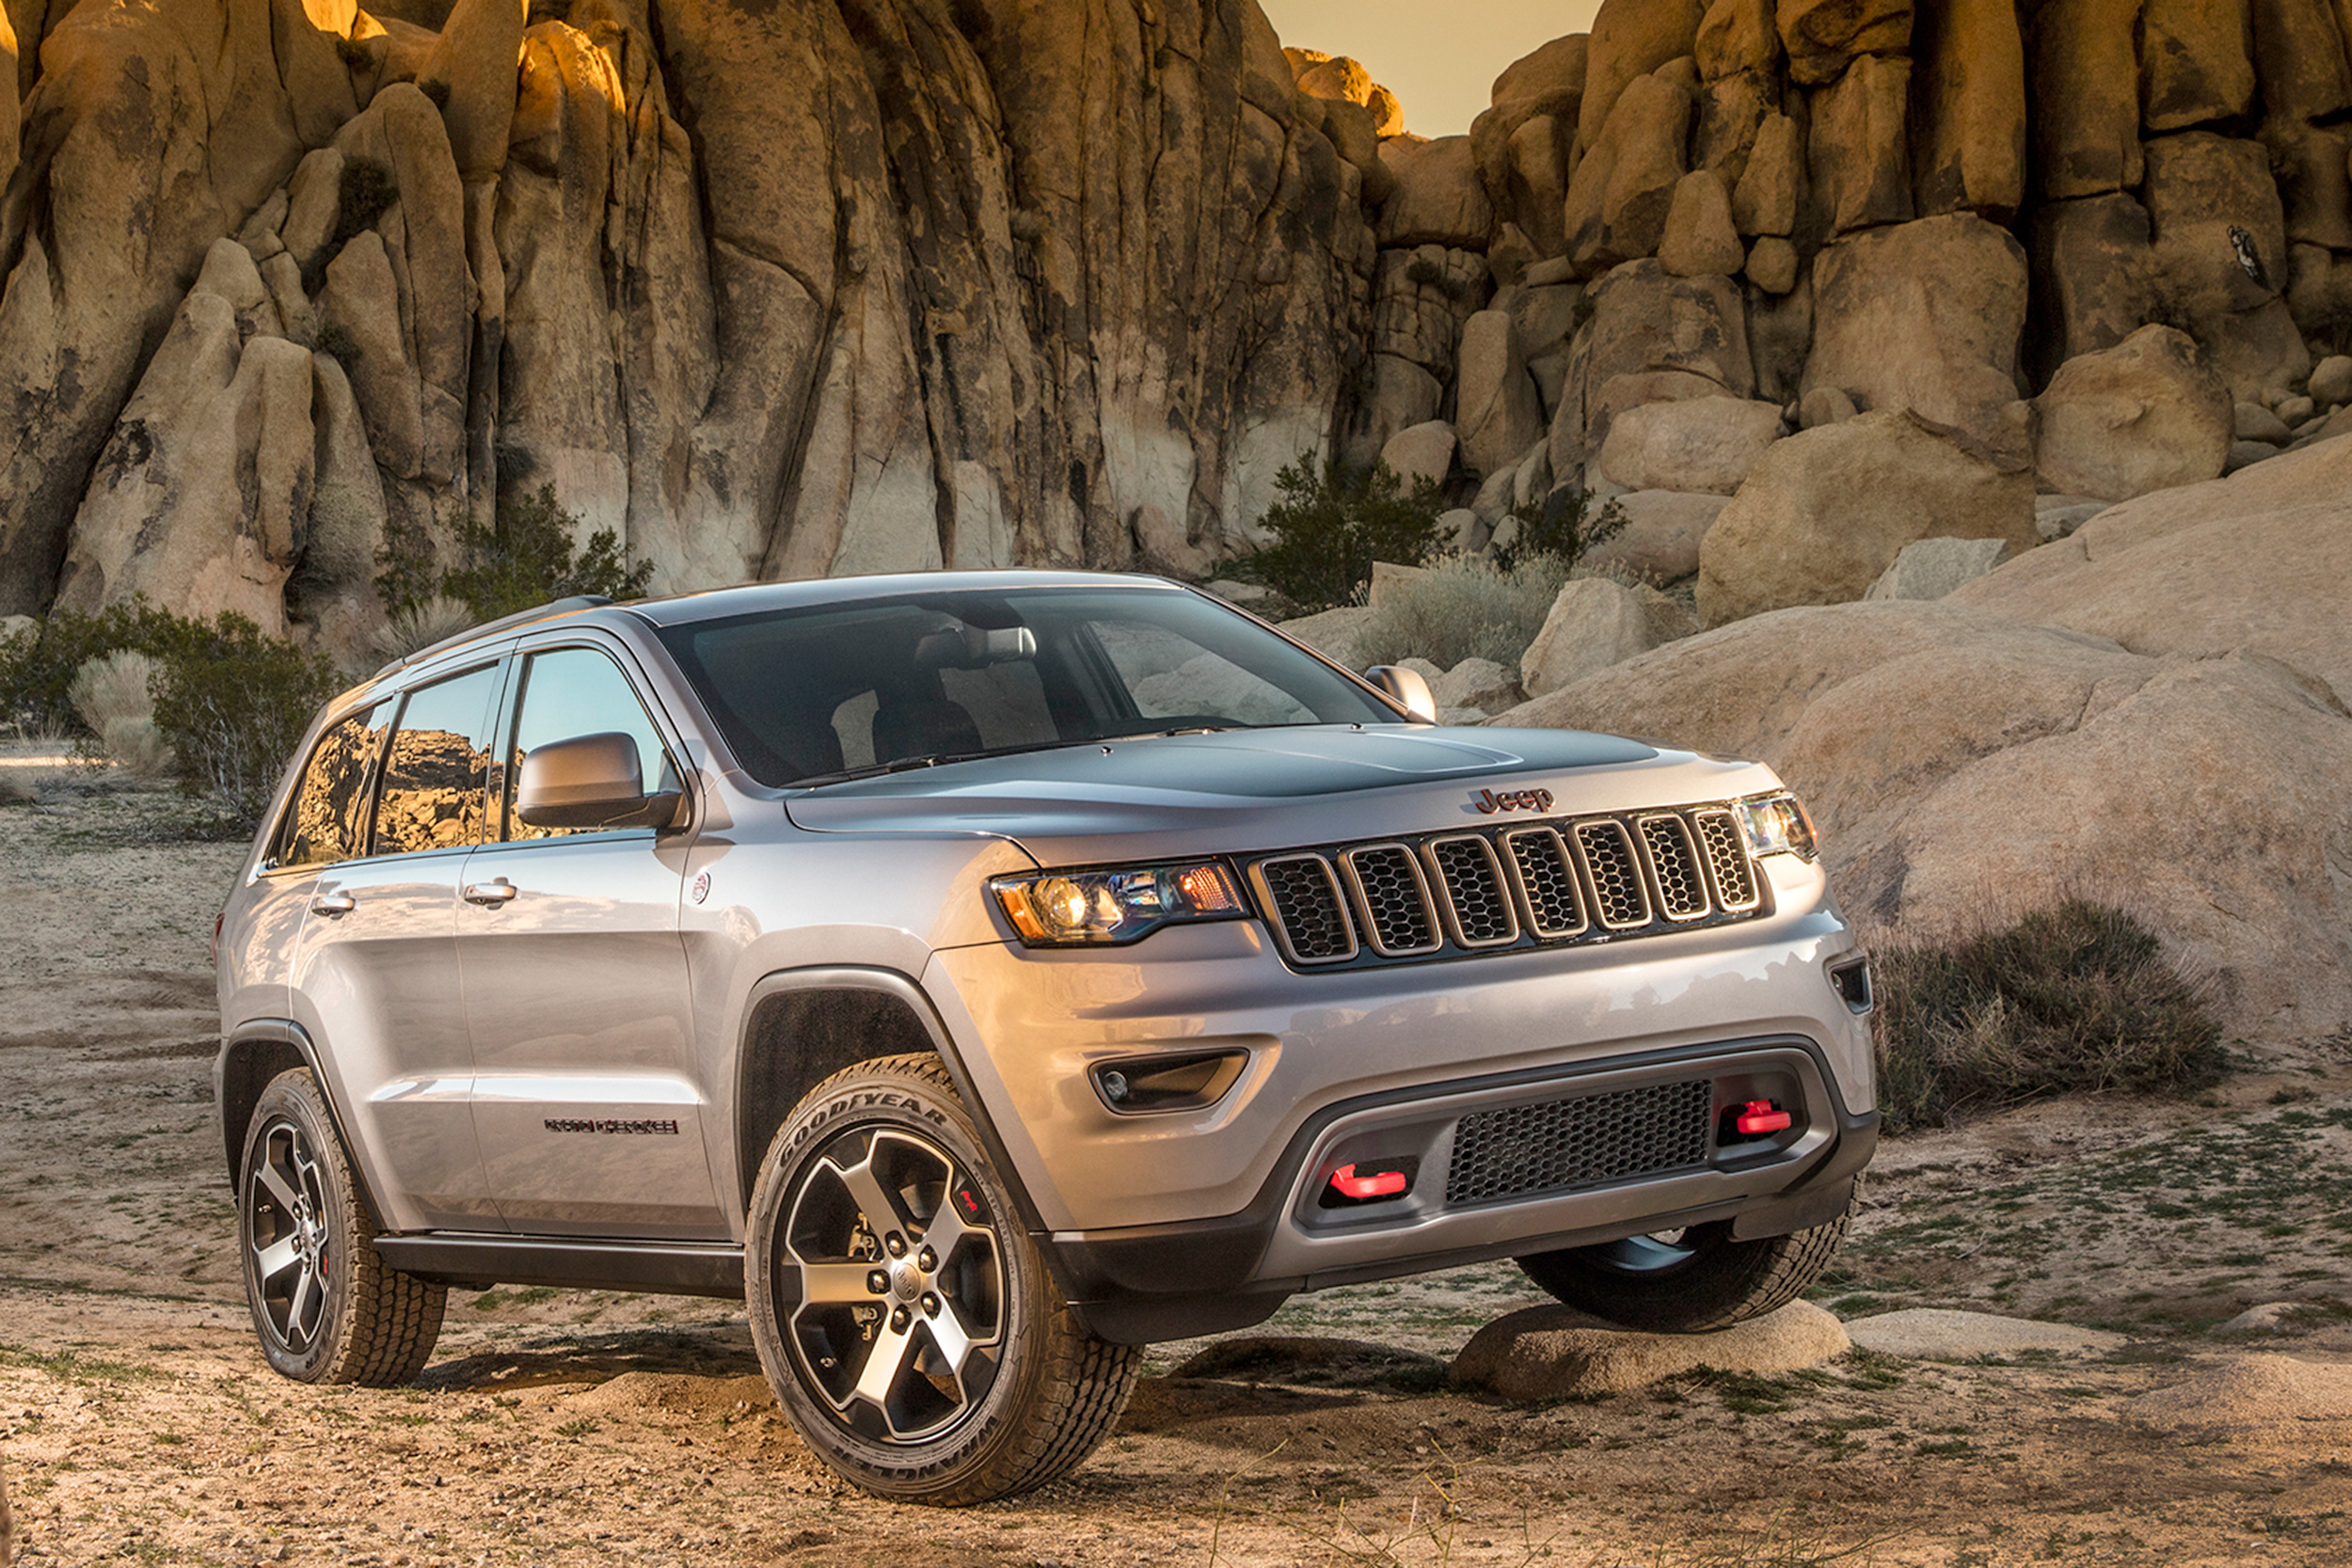 Jeep Grand Cherokee Overland 4WD 2017 International Price amp Overview